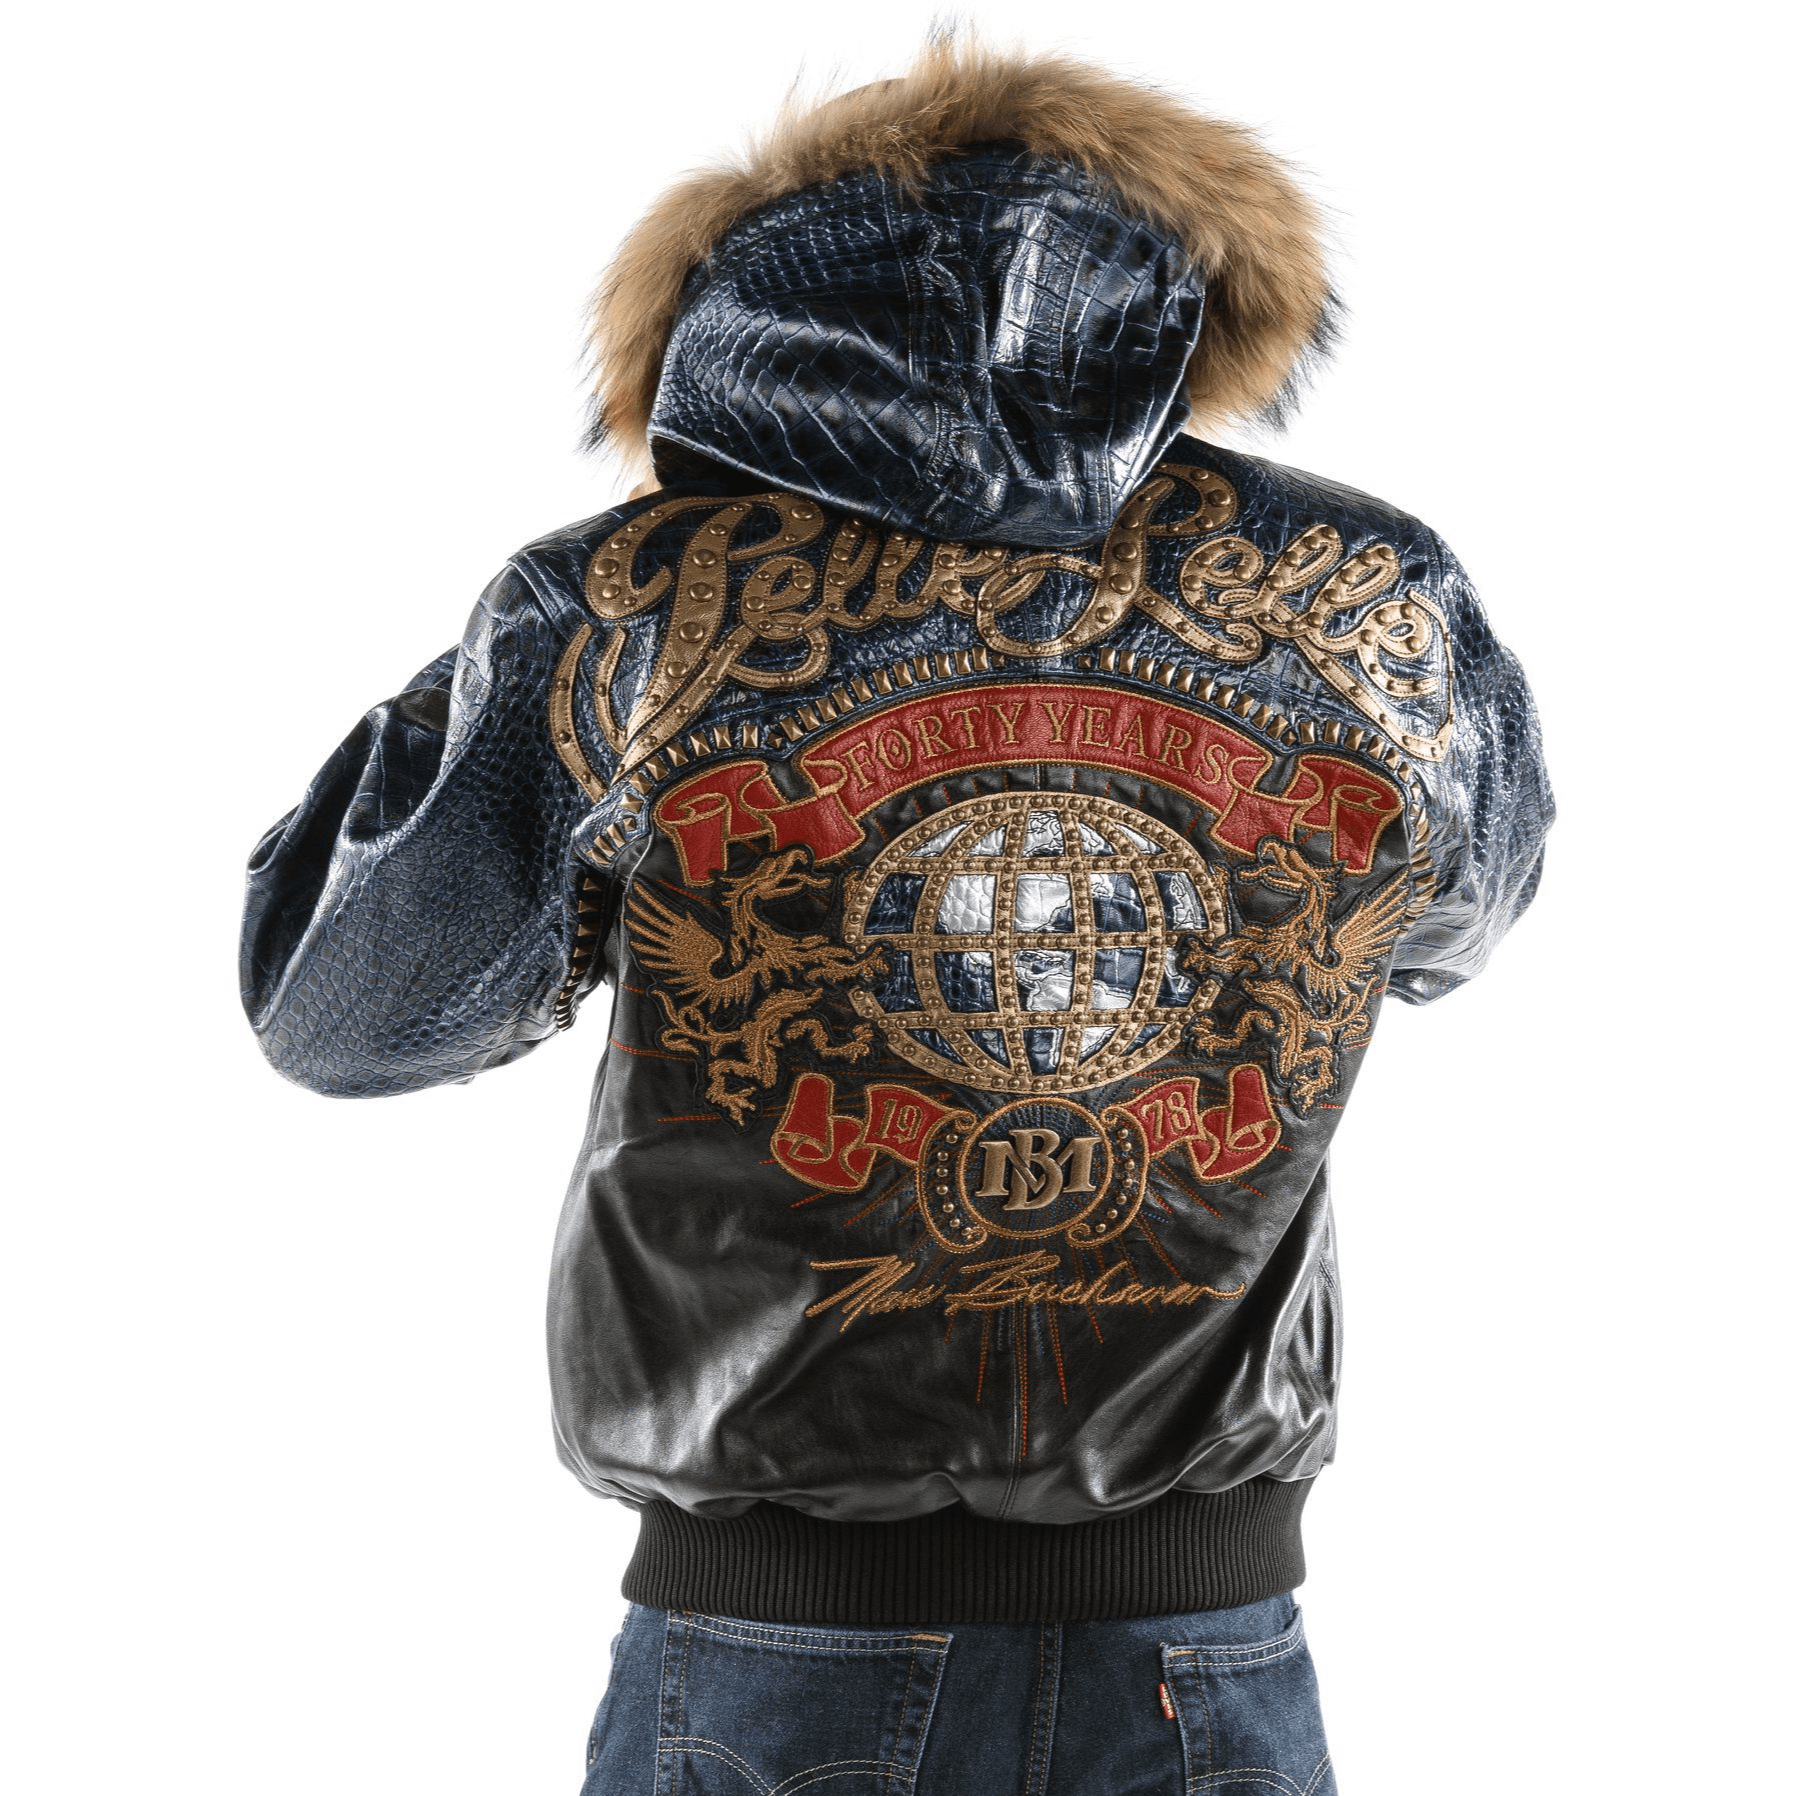 Forty Years Pelle Pelle Black And Blue MB Leather Jacket